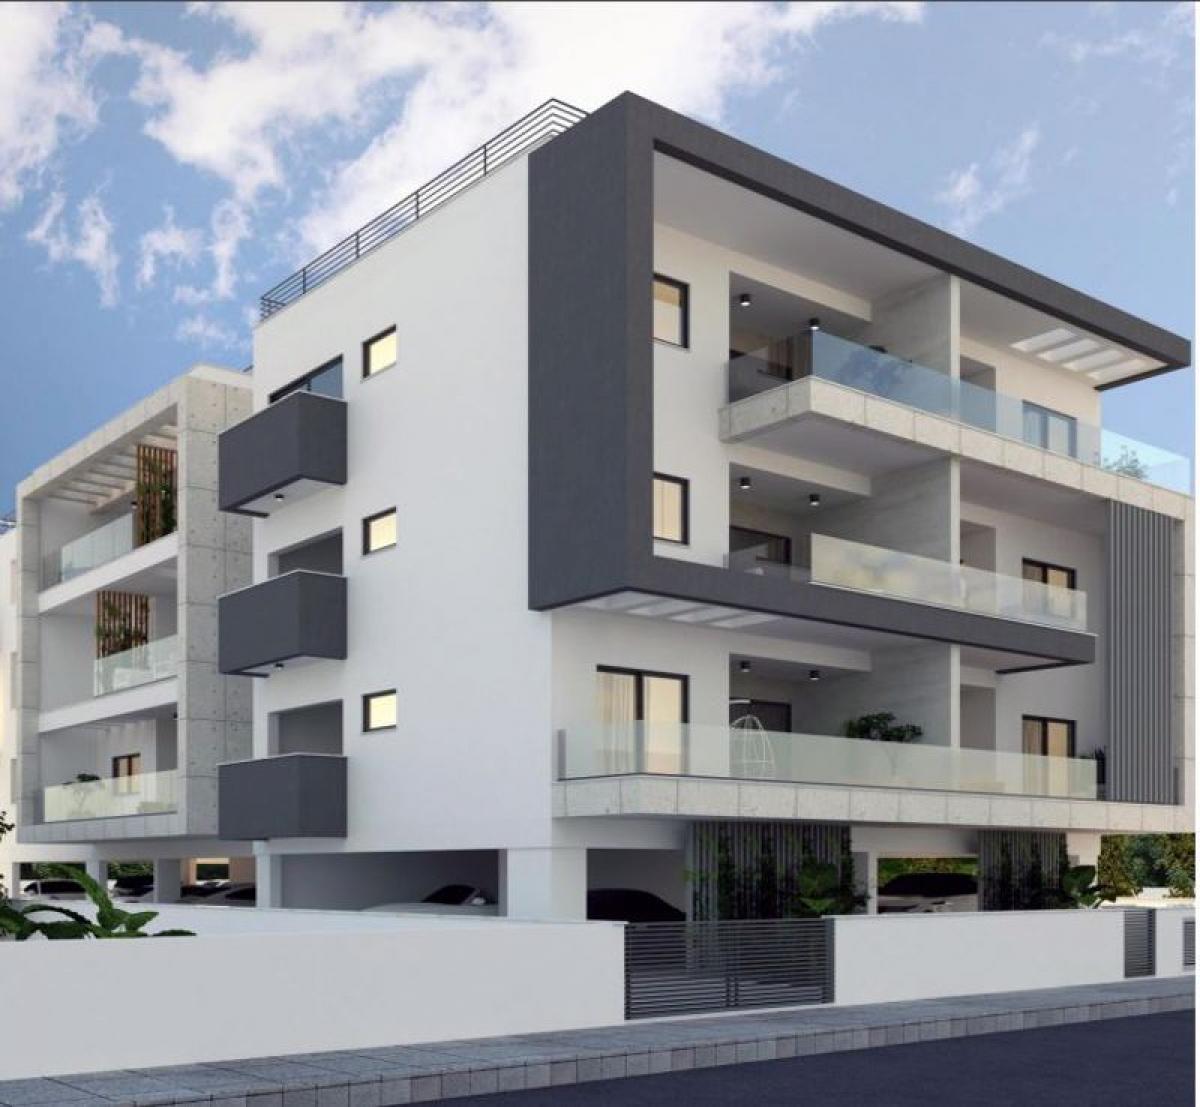 Picture of Apartment For Sale in Zakaki, Limassol, Cyprus